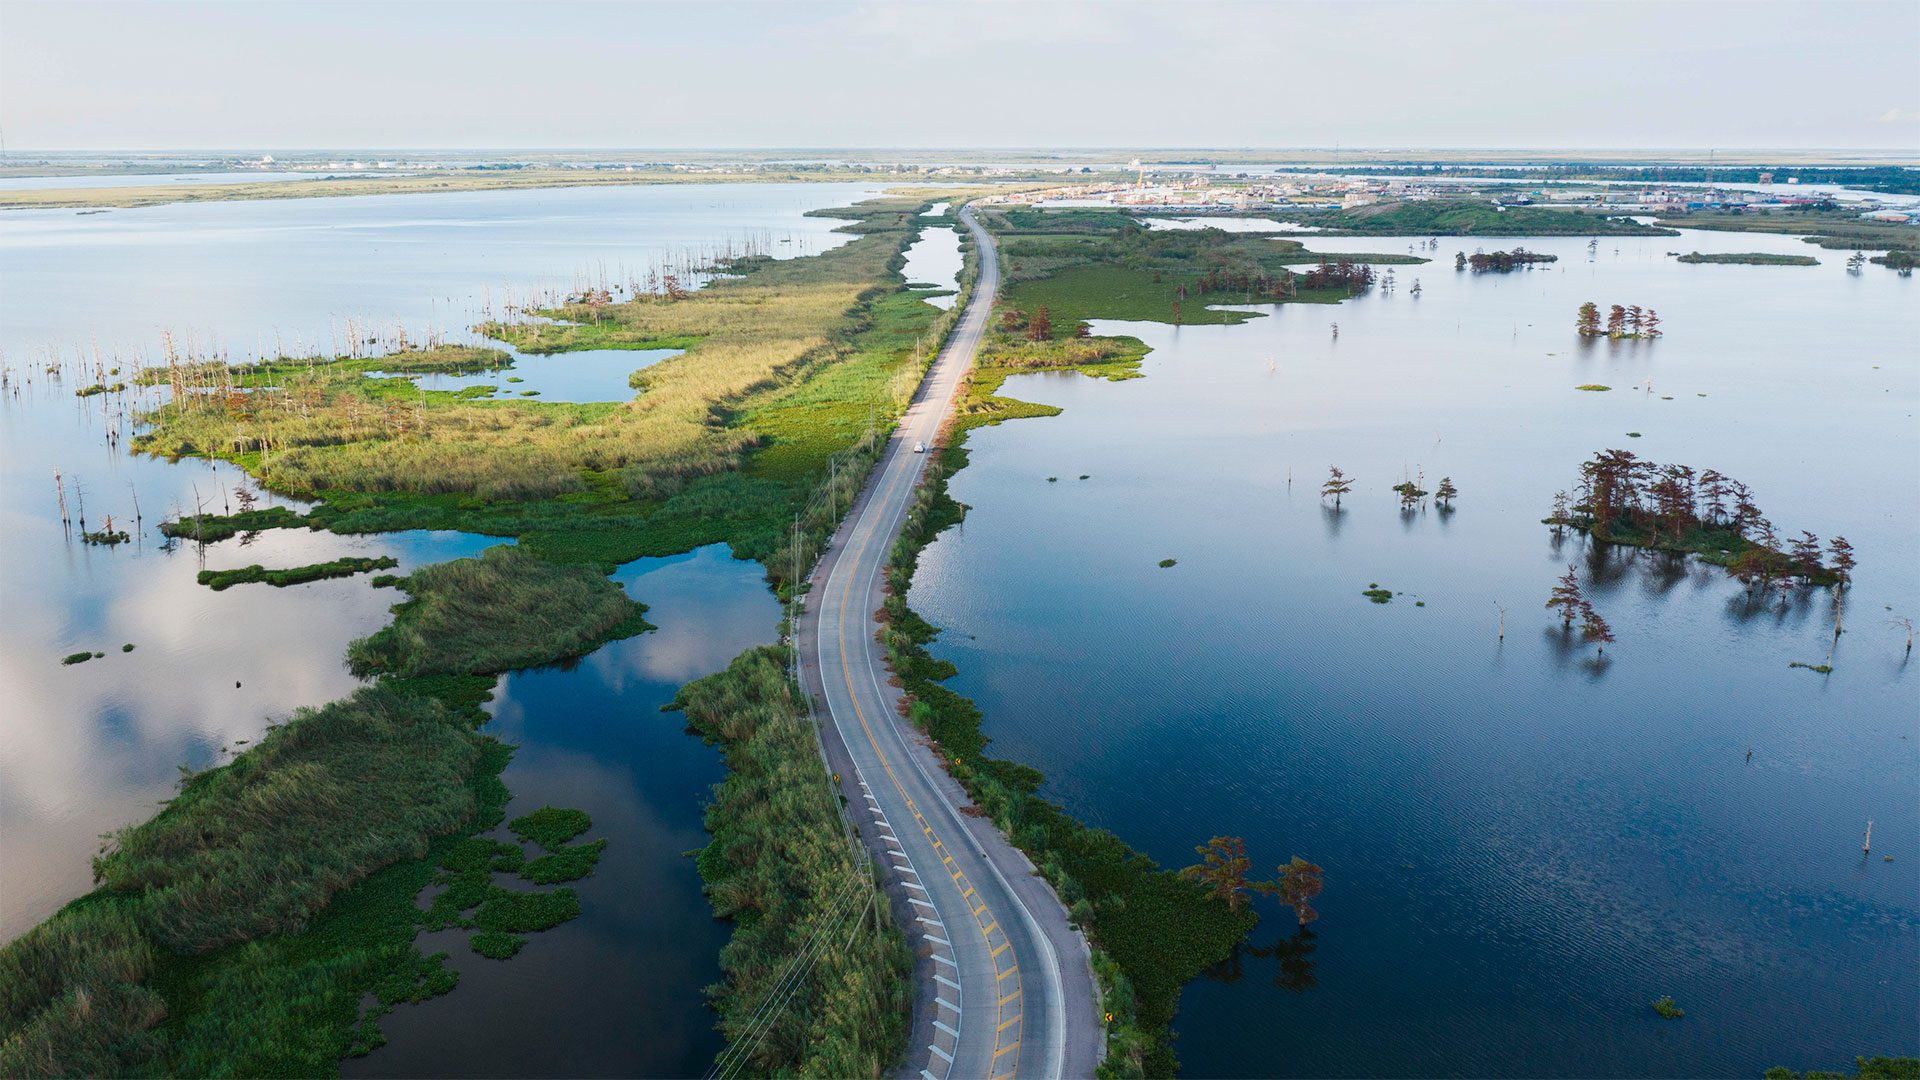 In Louisiana, a car meanders through a low-lying road flanked by swamps in the Mississippi River Delta. (Photo by Odysseas Chloridis, © Alamy Stock Photos)